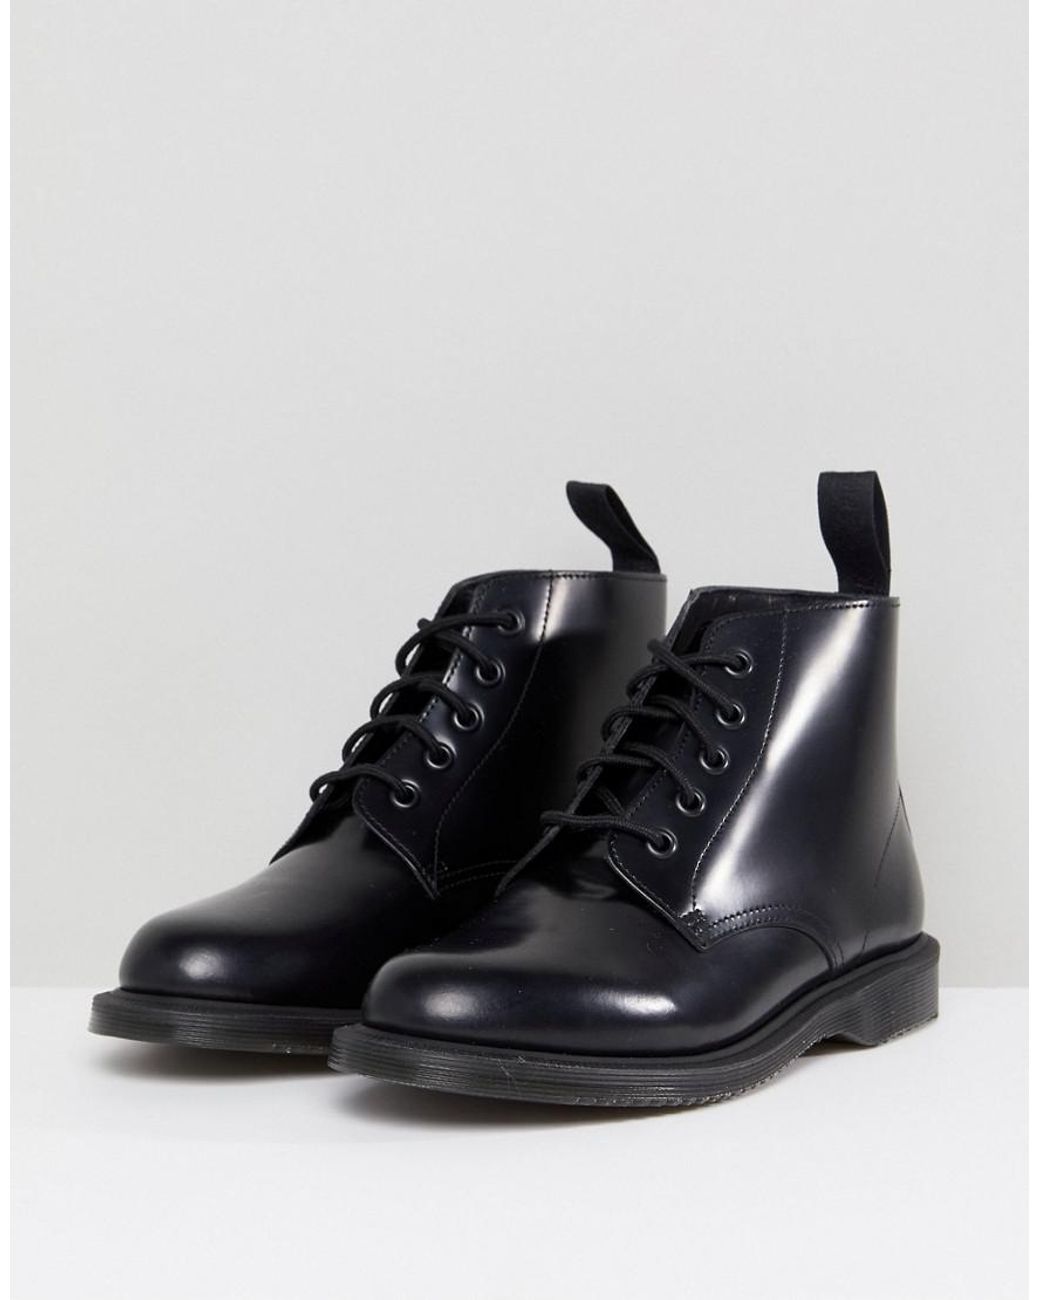 Dr. Martens Emmeline Refined Lace Up Leather Boot in Black | Lyst